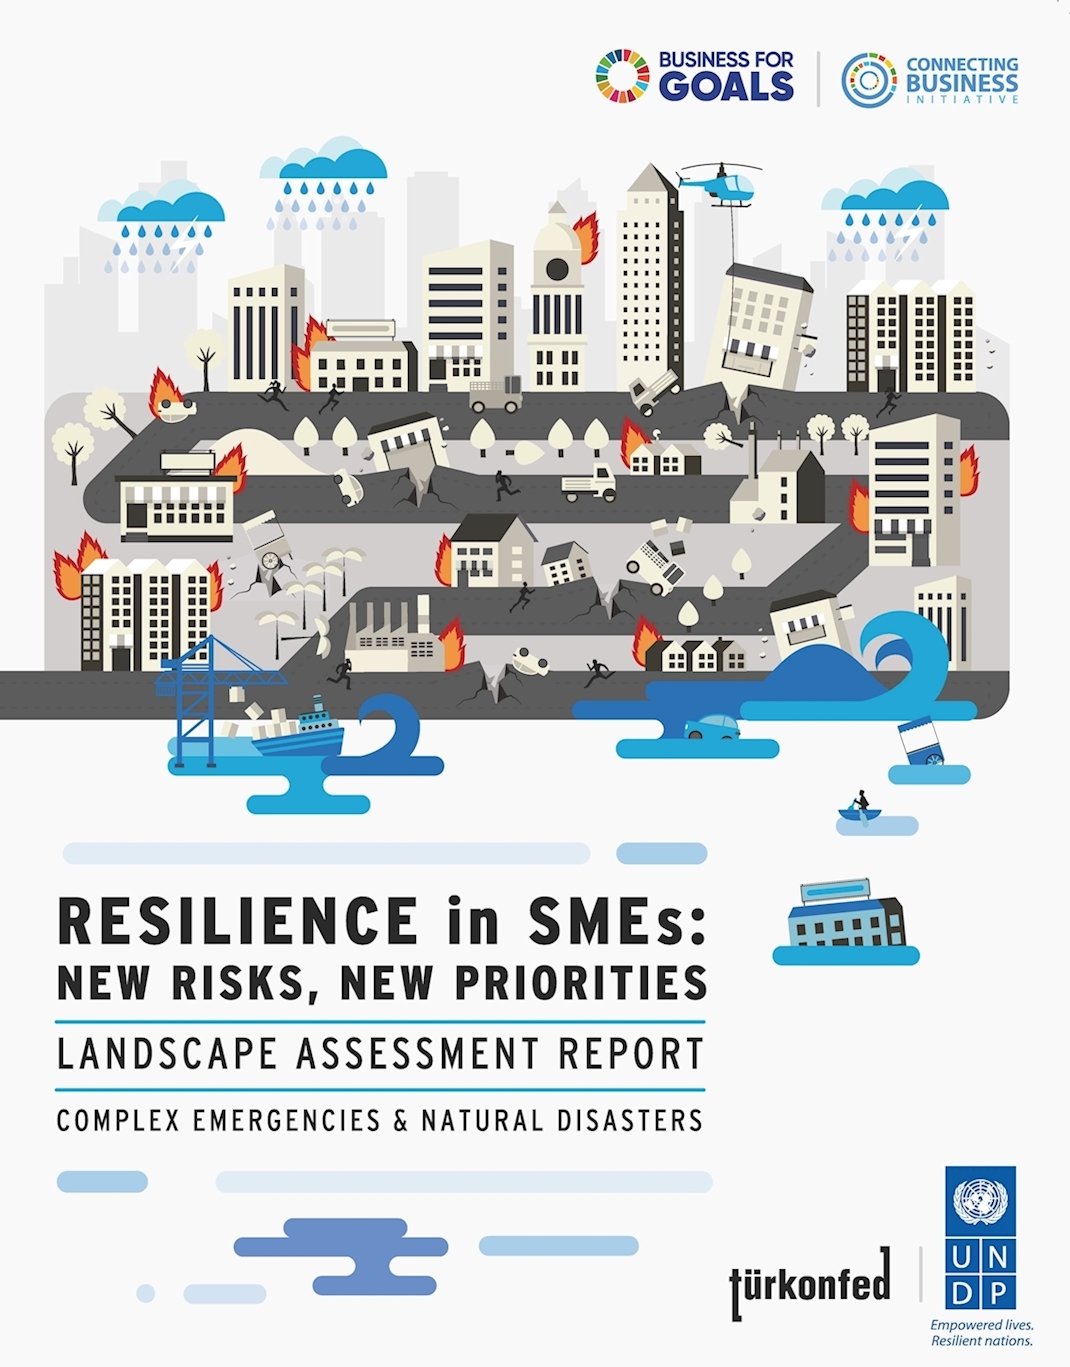 "Resilience in SMEs: New Risks, New Priorities" Report